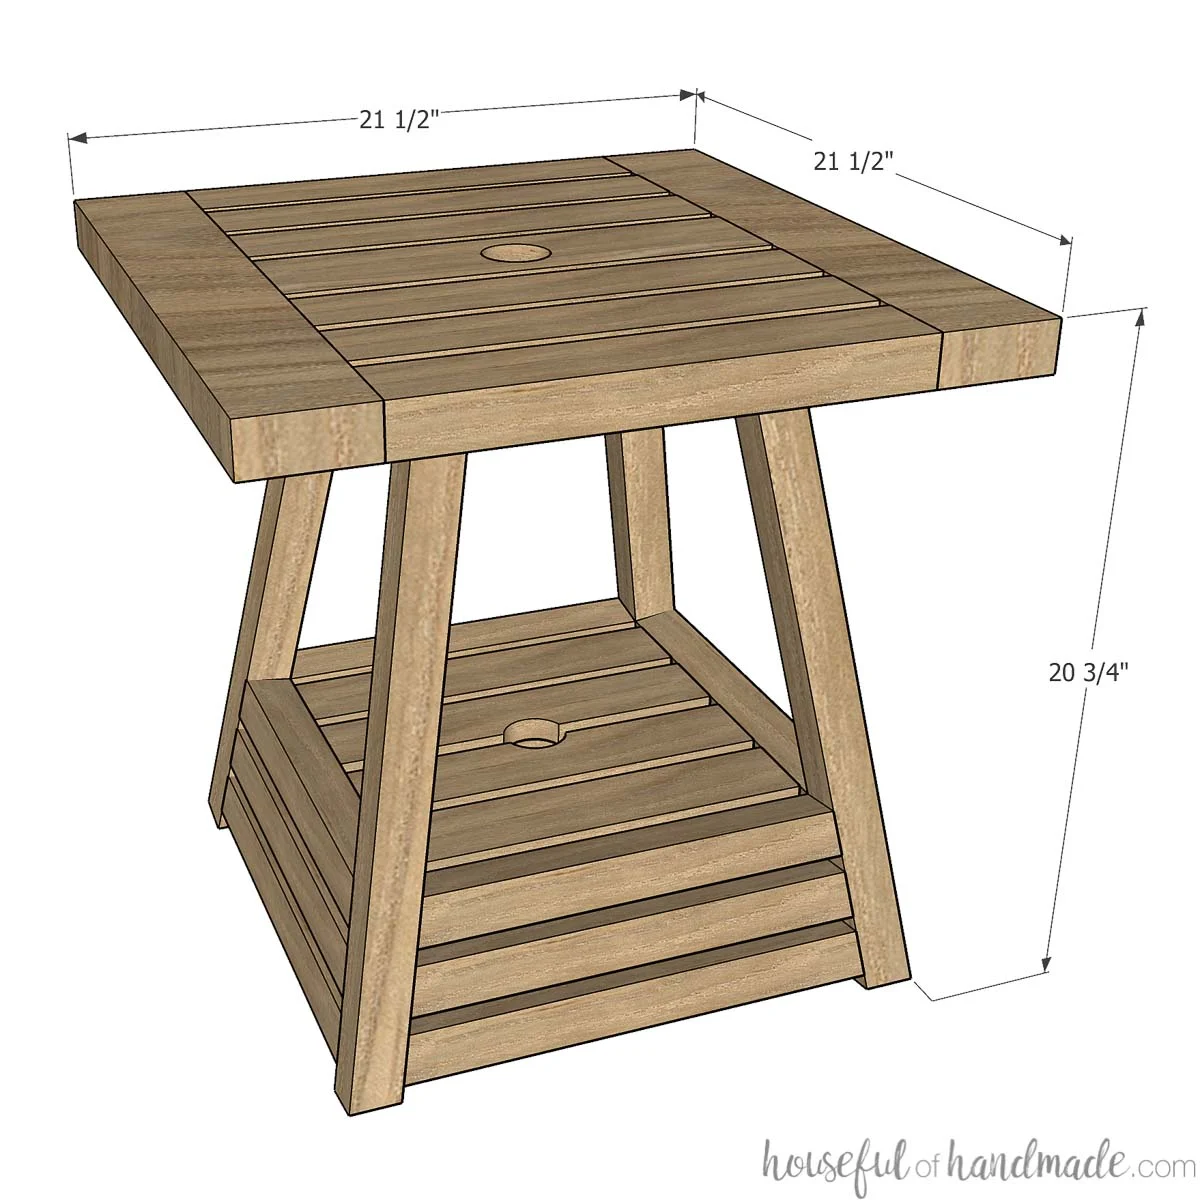 3d sketch of umbrella side table with measurements on it. 